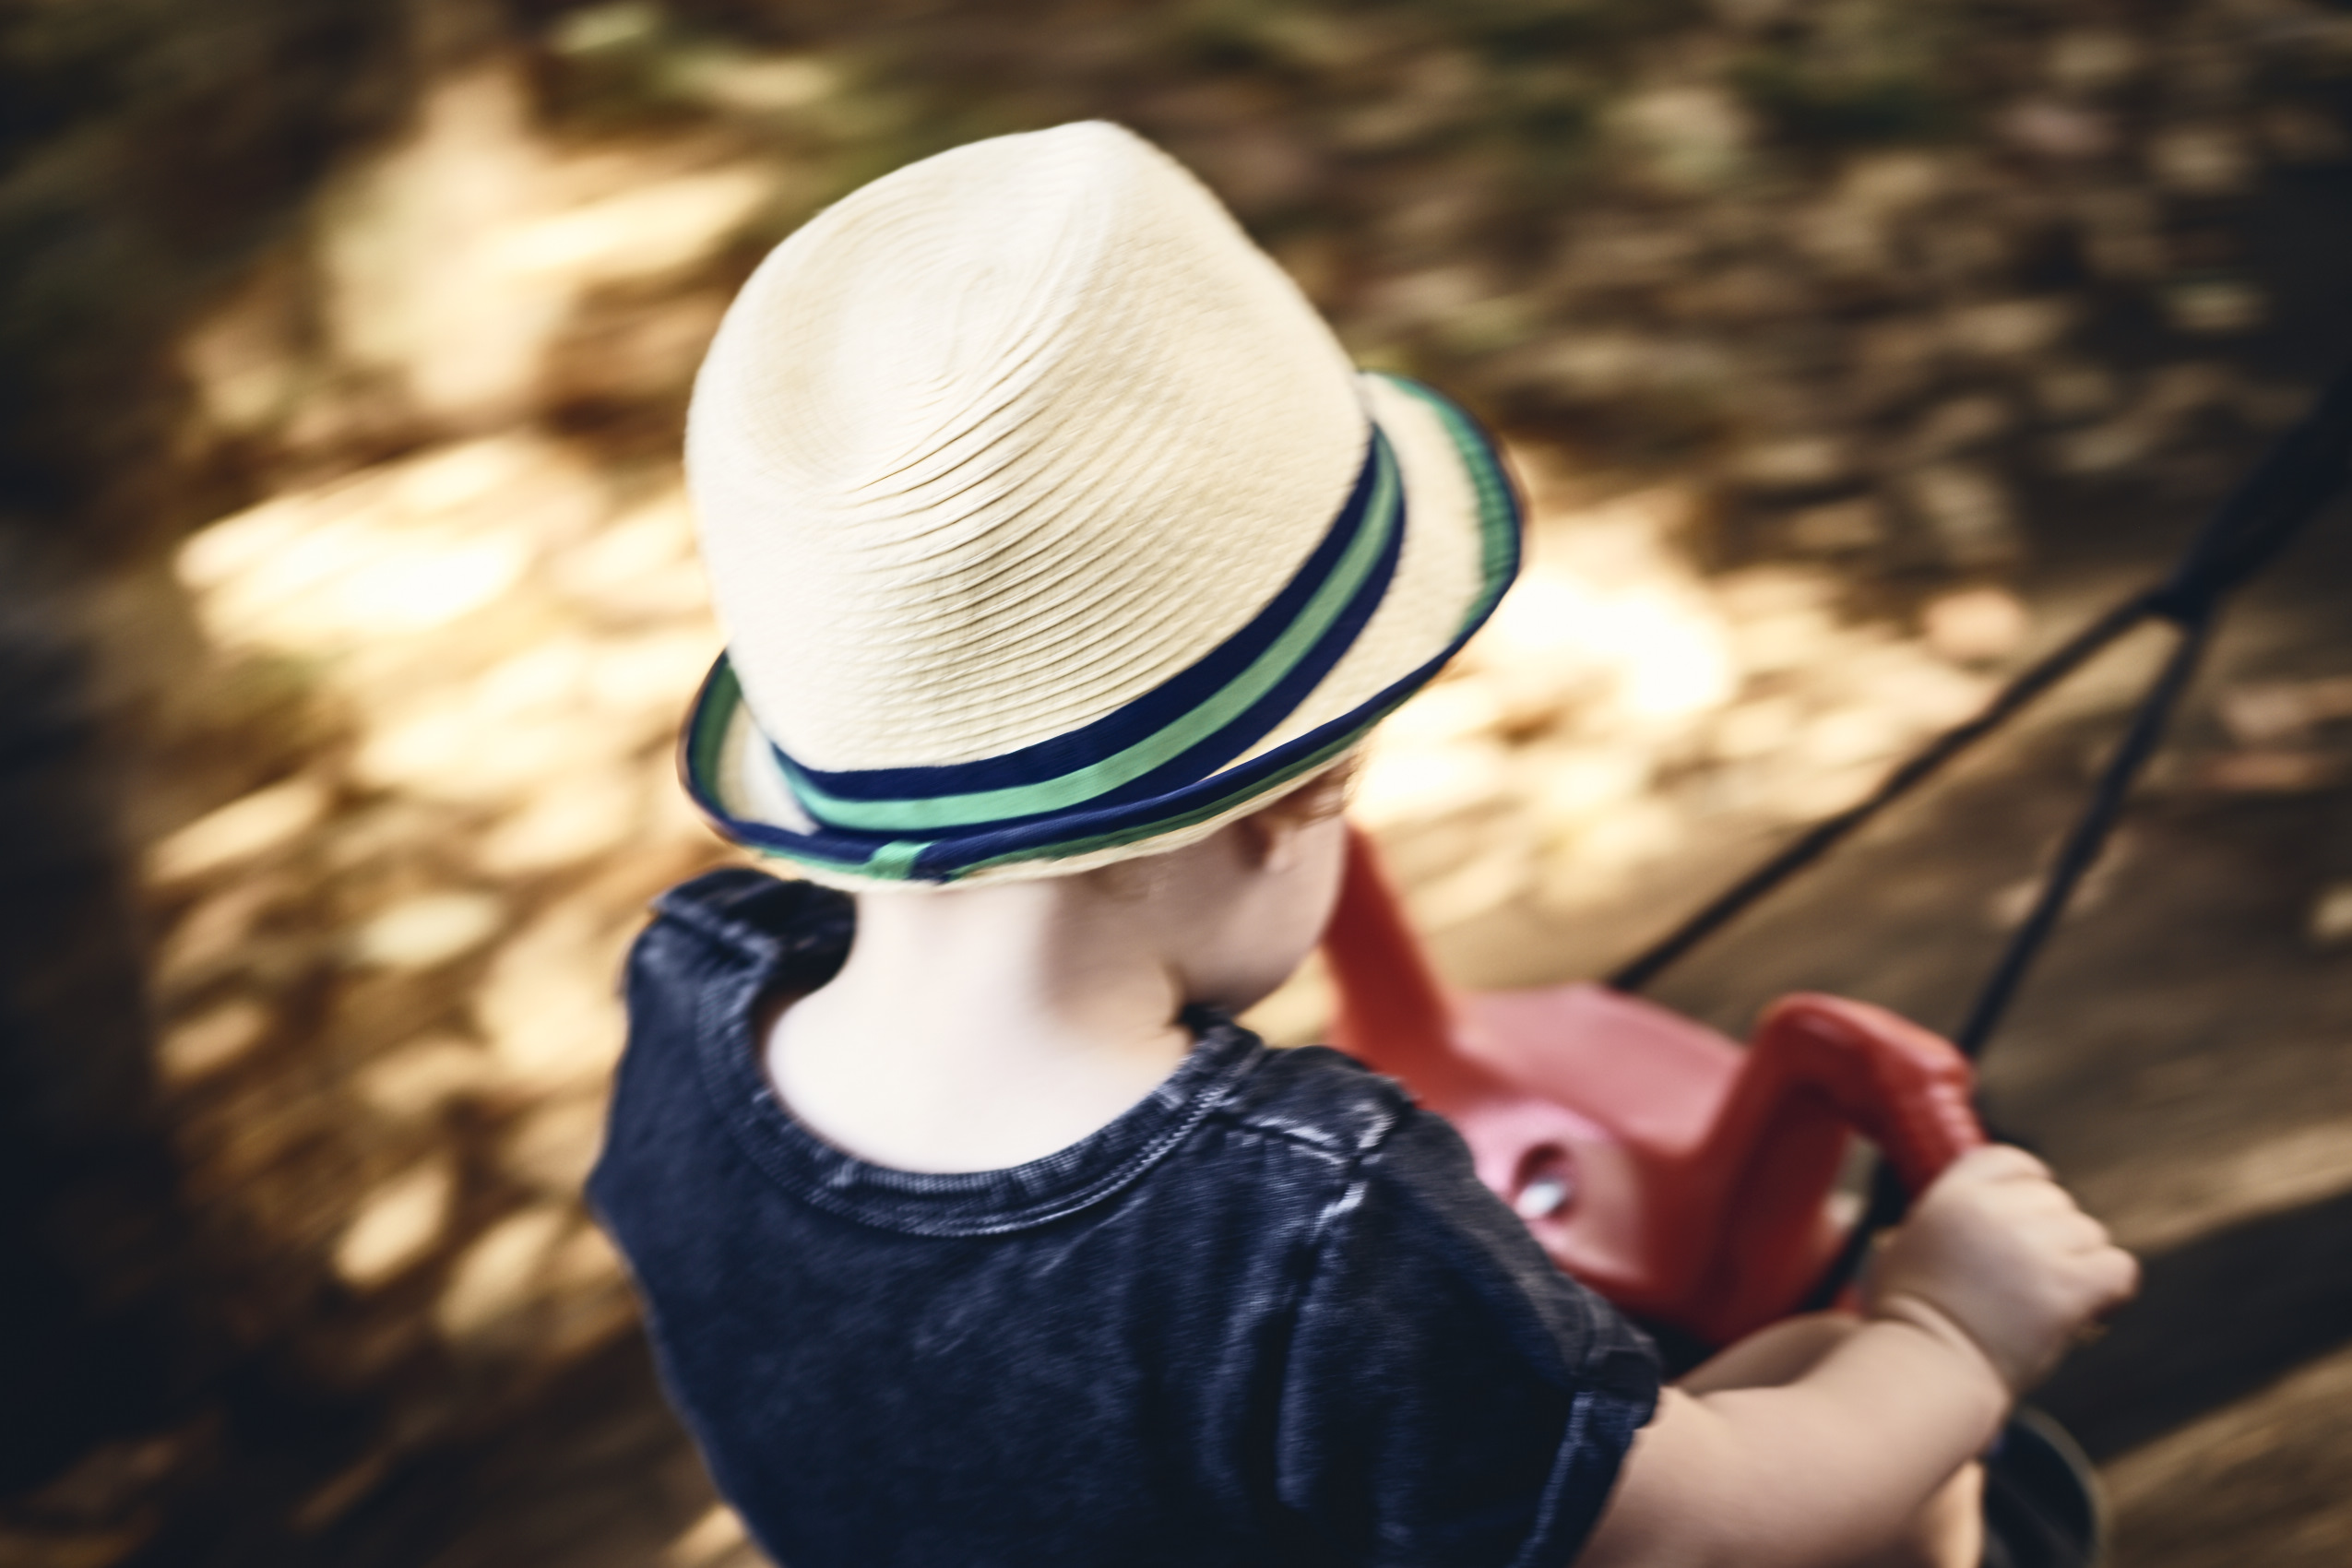 Lockdown • Toddler Riding Tricycle in Bowler Hat • Lifestyle & Portrait Photography